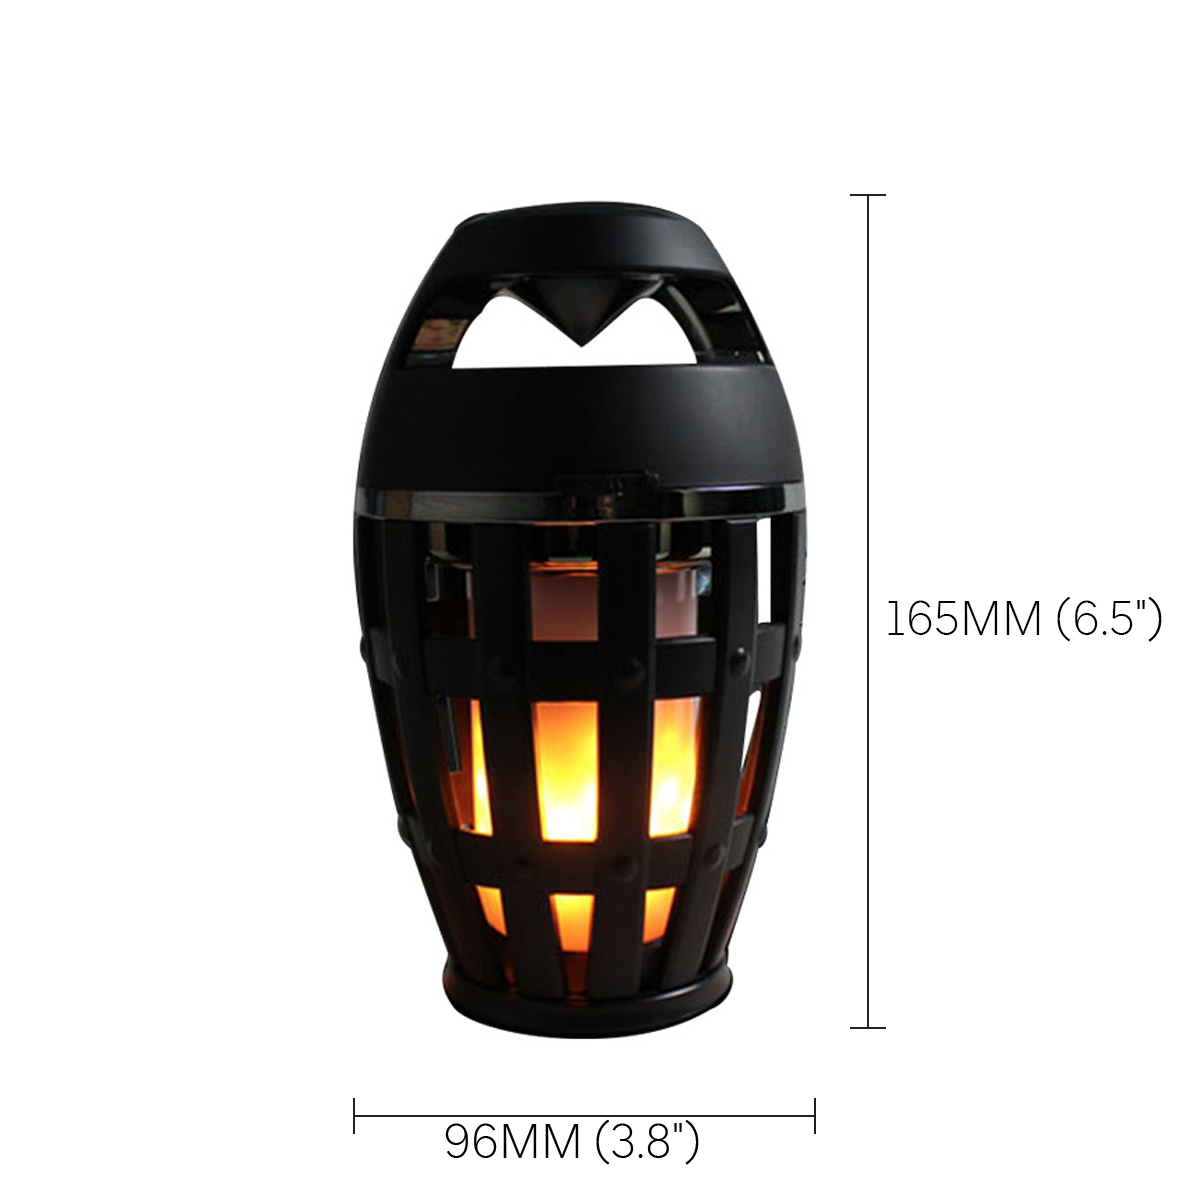 Wireless-bluetooth-Speaker-LED-Flame-Light-Night-Lamp-Portable-Stereo-Speaker-with-Flickers-Warm-Whi-1619613-3